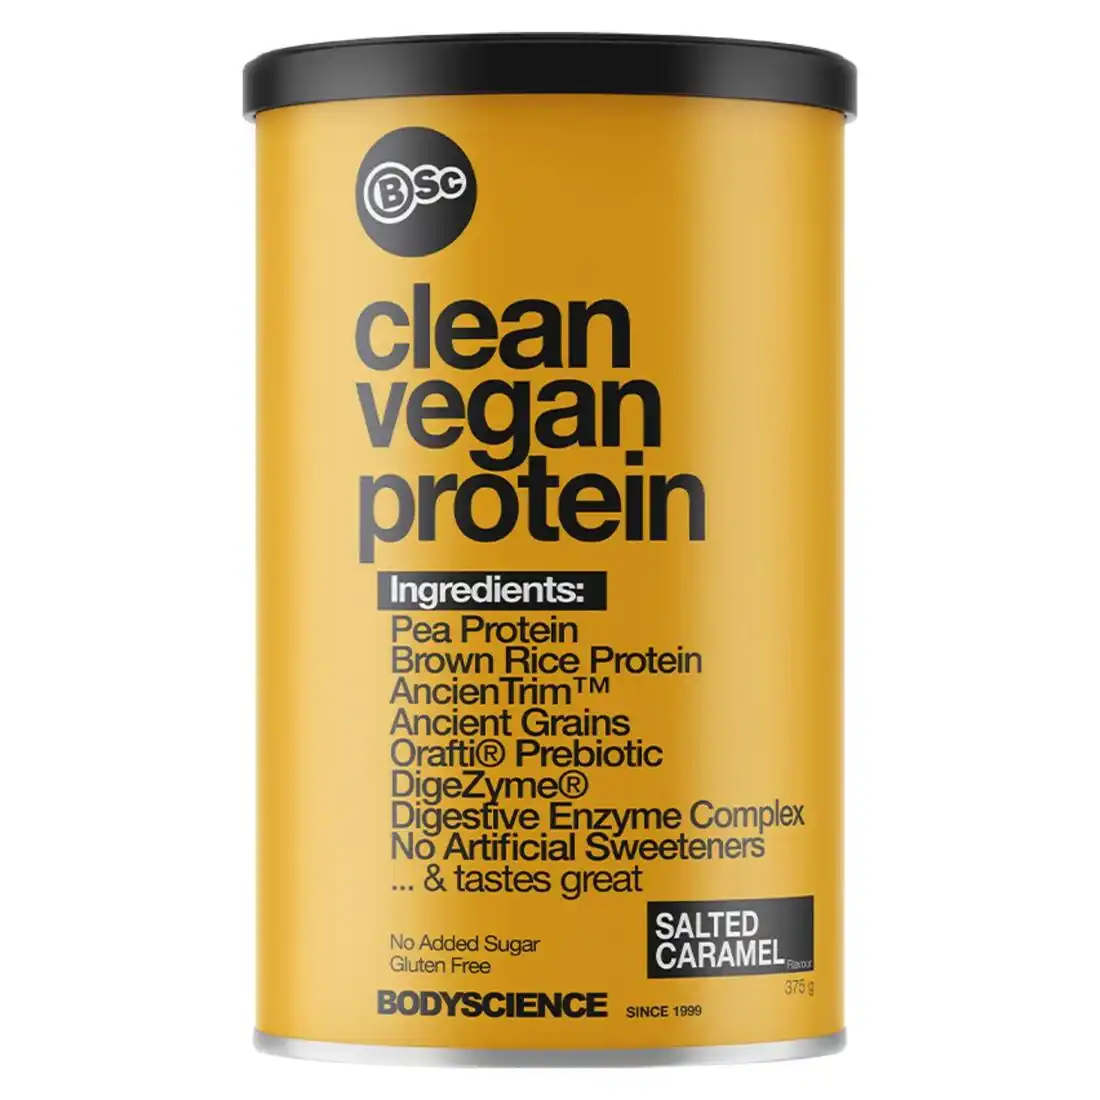 Buy 3 save 30% OFF on Body Science Clean Vegan Protein 375g powder + free shipping